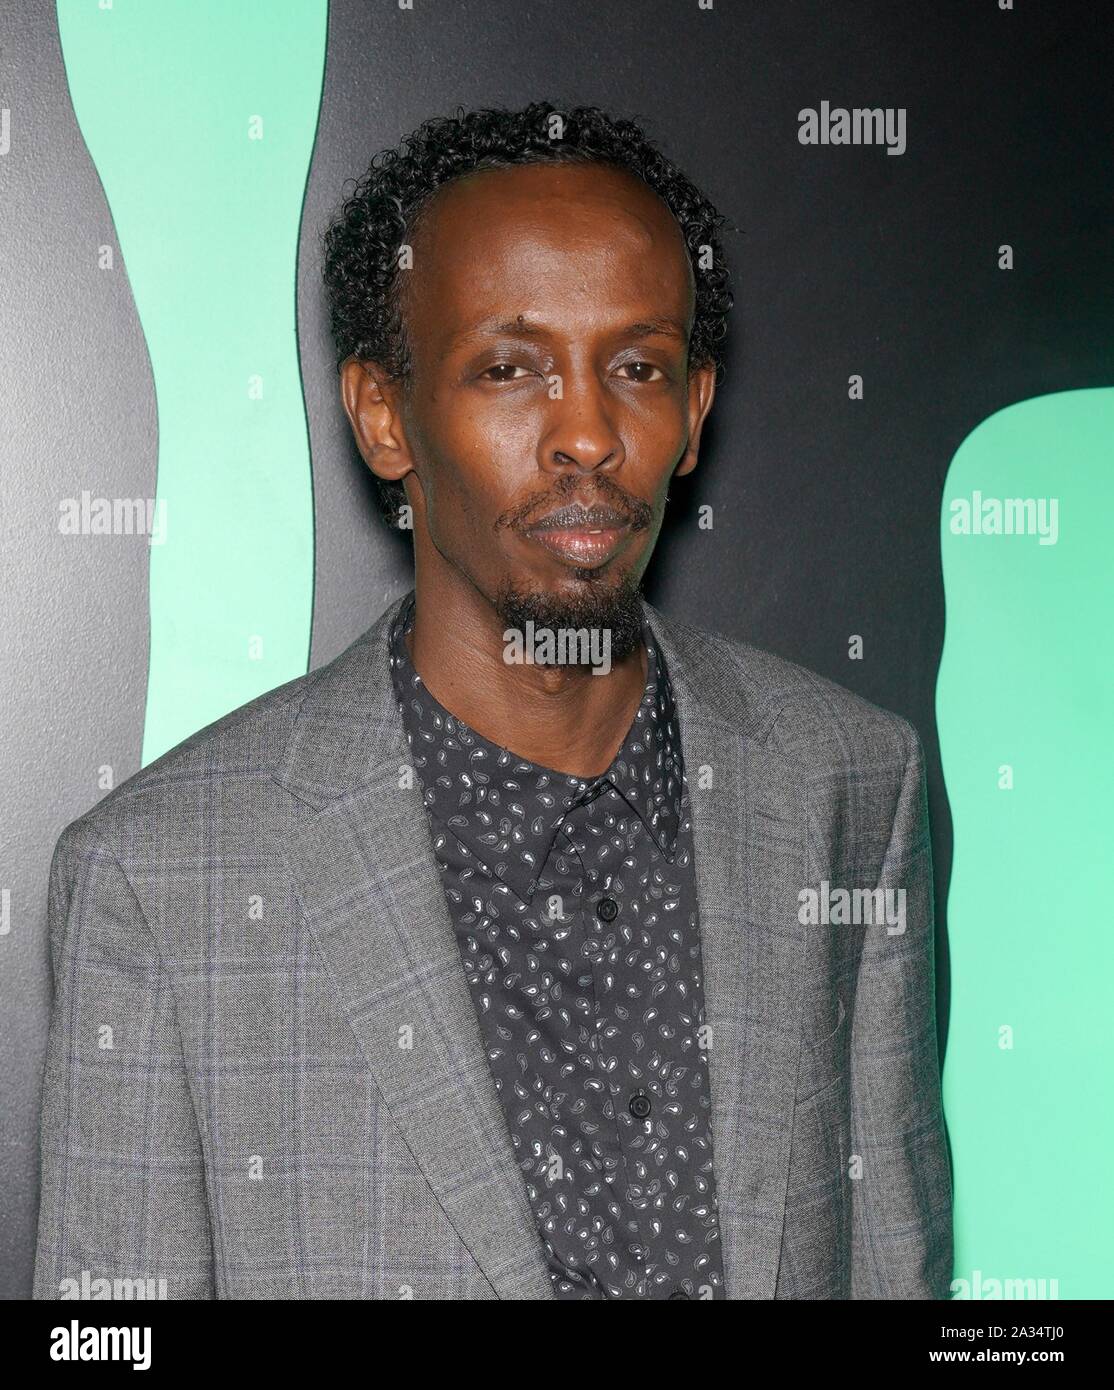 New York, NY, USA. 4th Oct, 2019. Barkhad Abdi at arrivals for HULU Celebrates Halloween with HULUWEEN, 221 West Broadway, New York, NY October 4, 2019. Credit: Eli Winston/Everett Collection/Alamy Live News Stock Photo